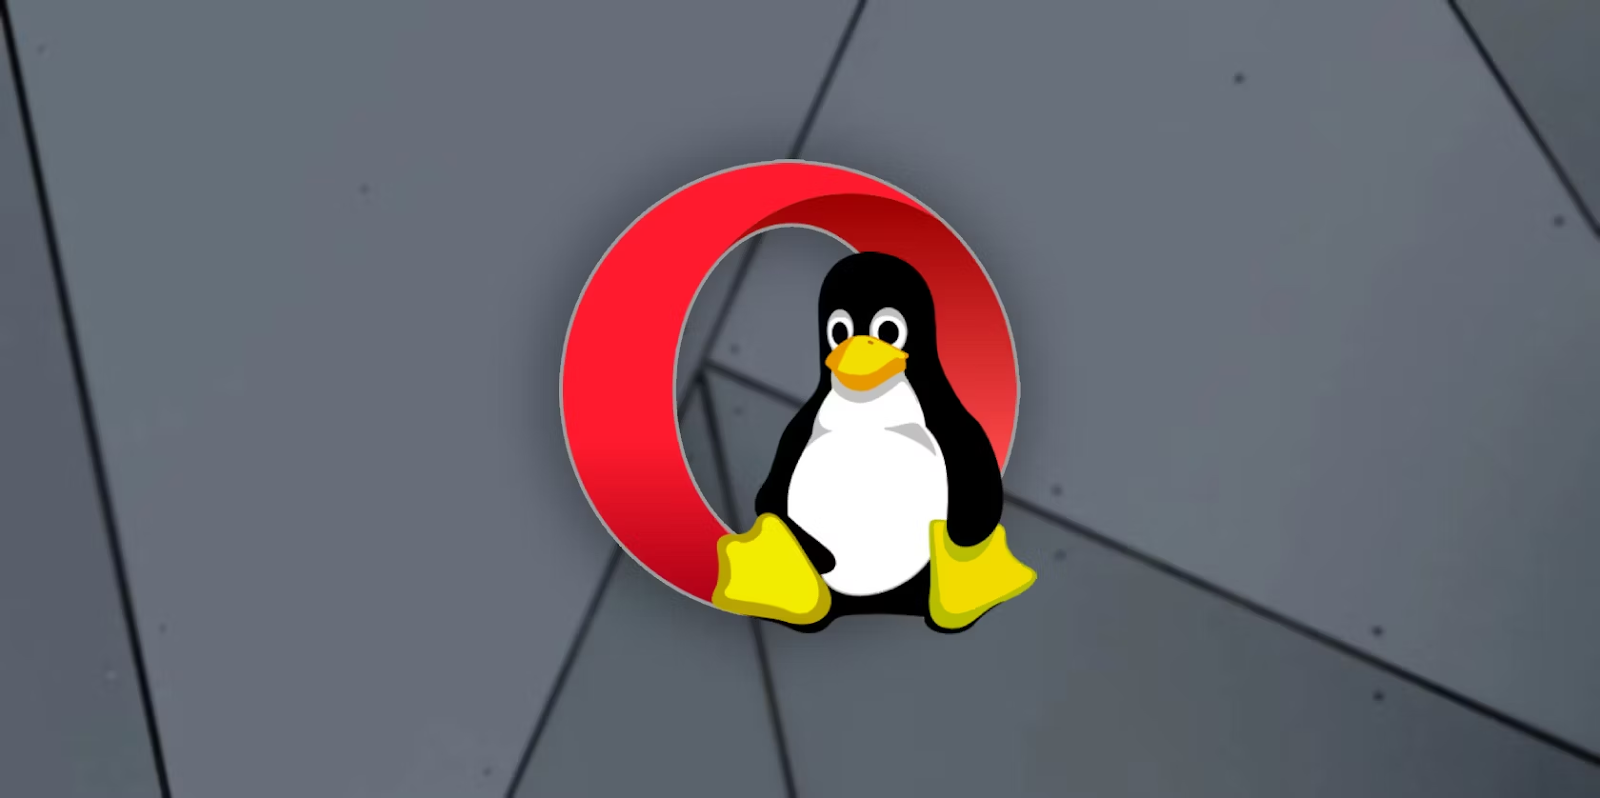 Opera and Linux Logos on Gray Background